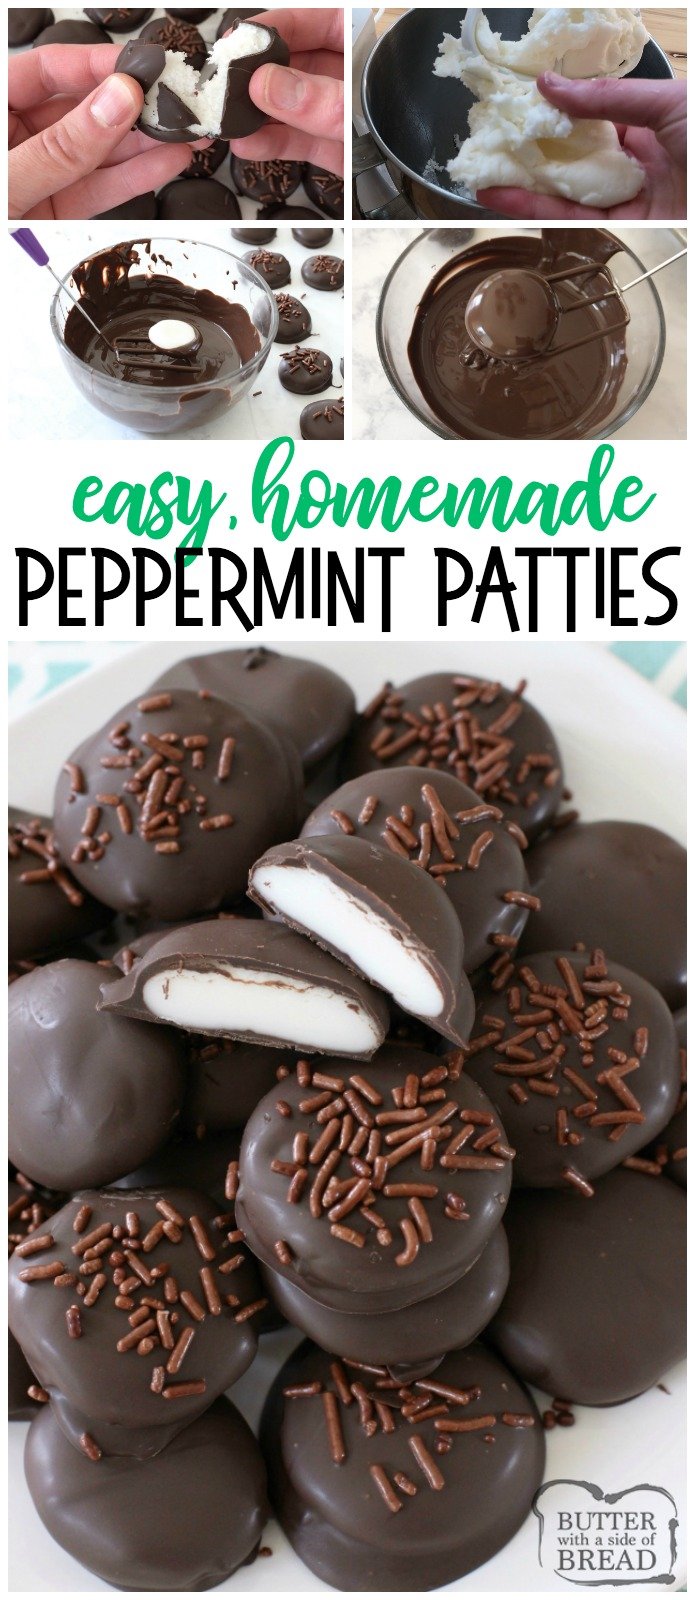 Easy Homemade Peppermint Patty recipe with just a handful of ingredients! Copycat York Peppermint Patties but BETTER. Simple soft, sweetened mint candy covered in chocolate for a delicious, easy peppermint patty #candy from Butter With A Side of Bread #peppermint #mint #chocolate #candies #york #recipe #food #dessert